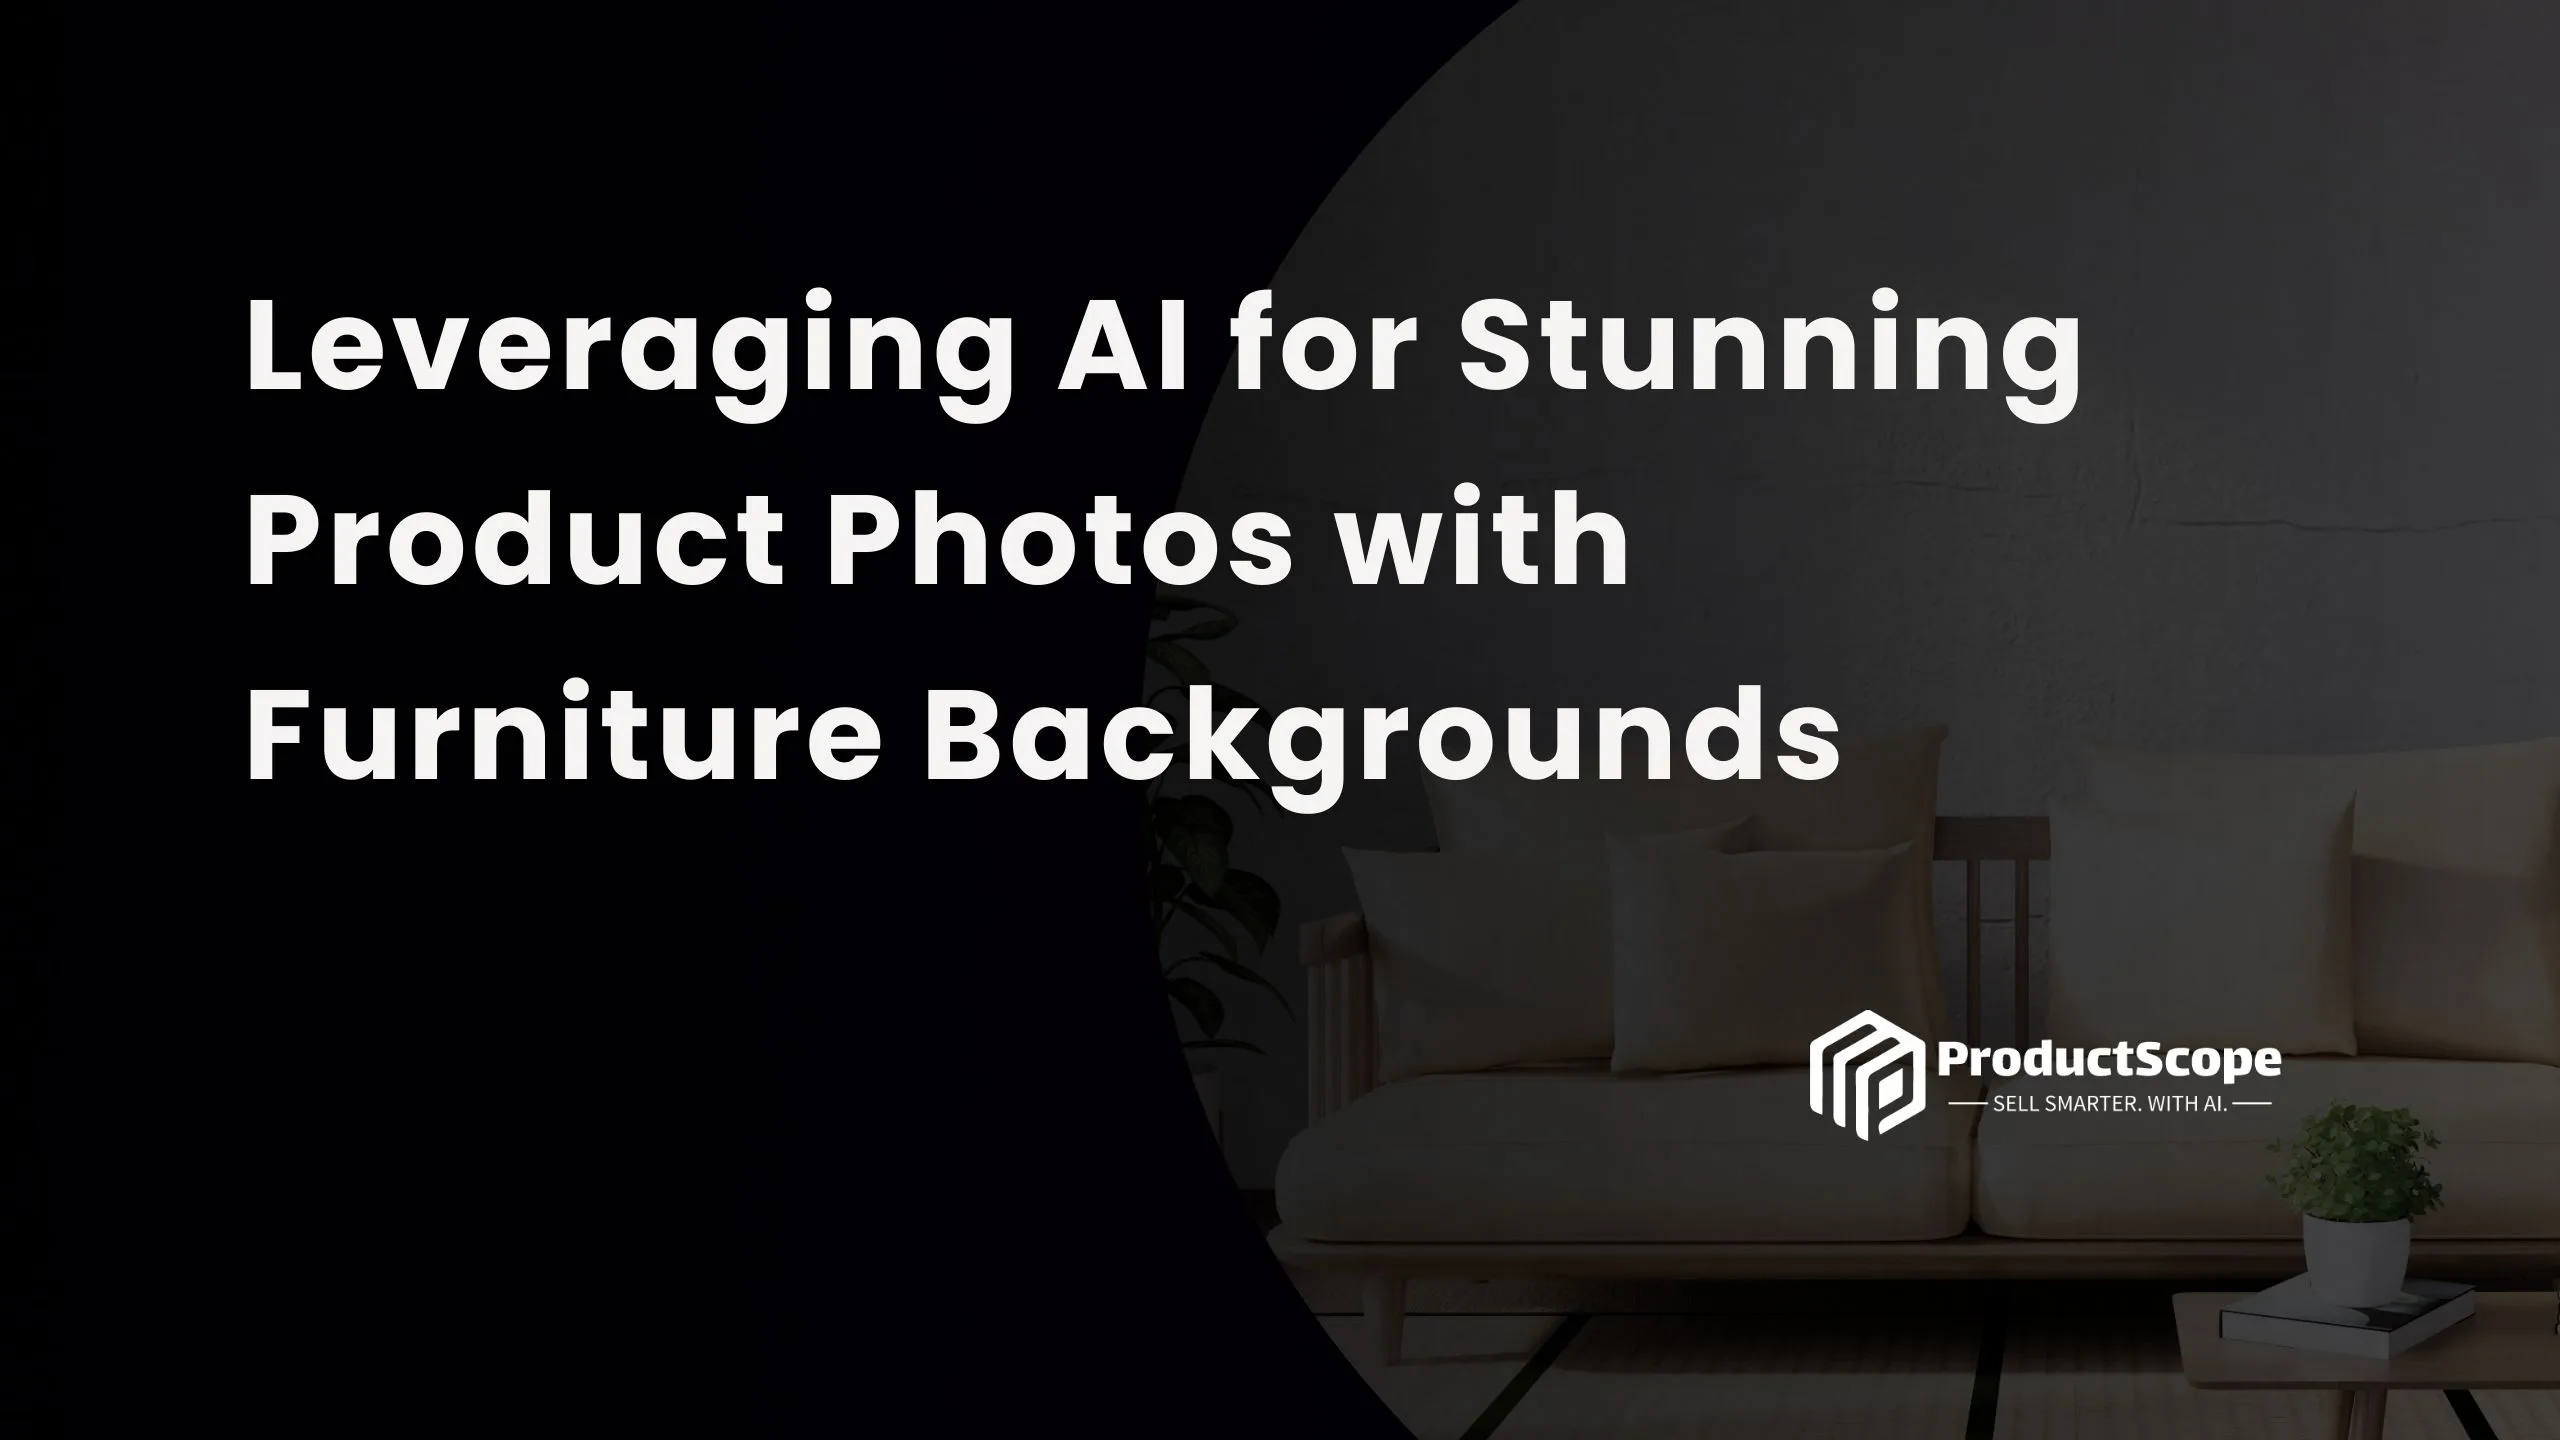 Leveraging AI for Stunning Product Photos with Furniture Backgrounds